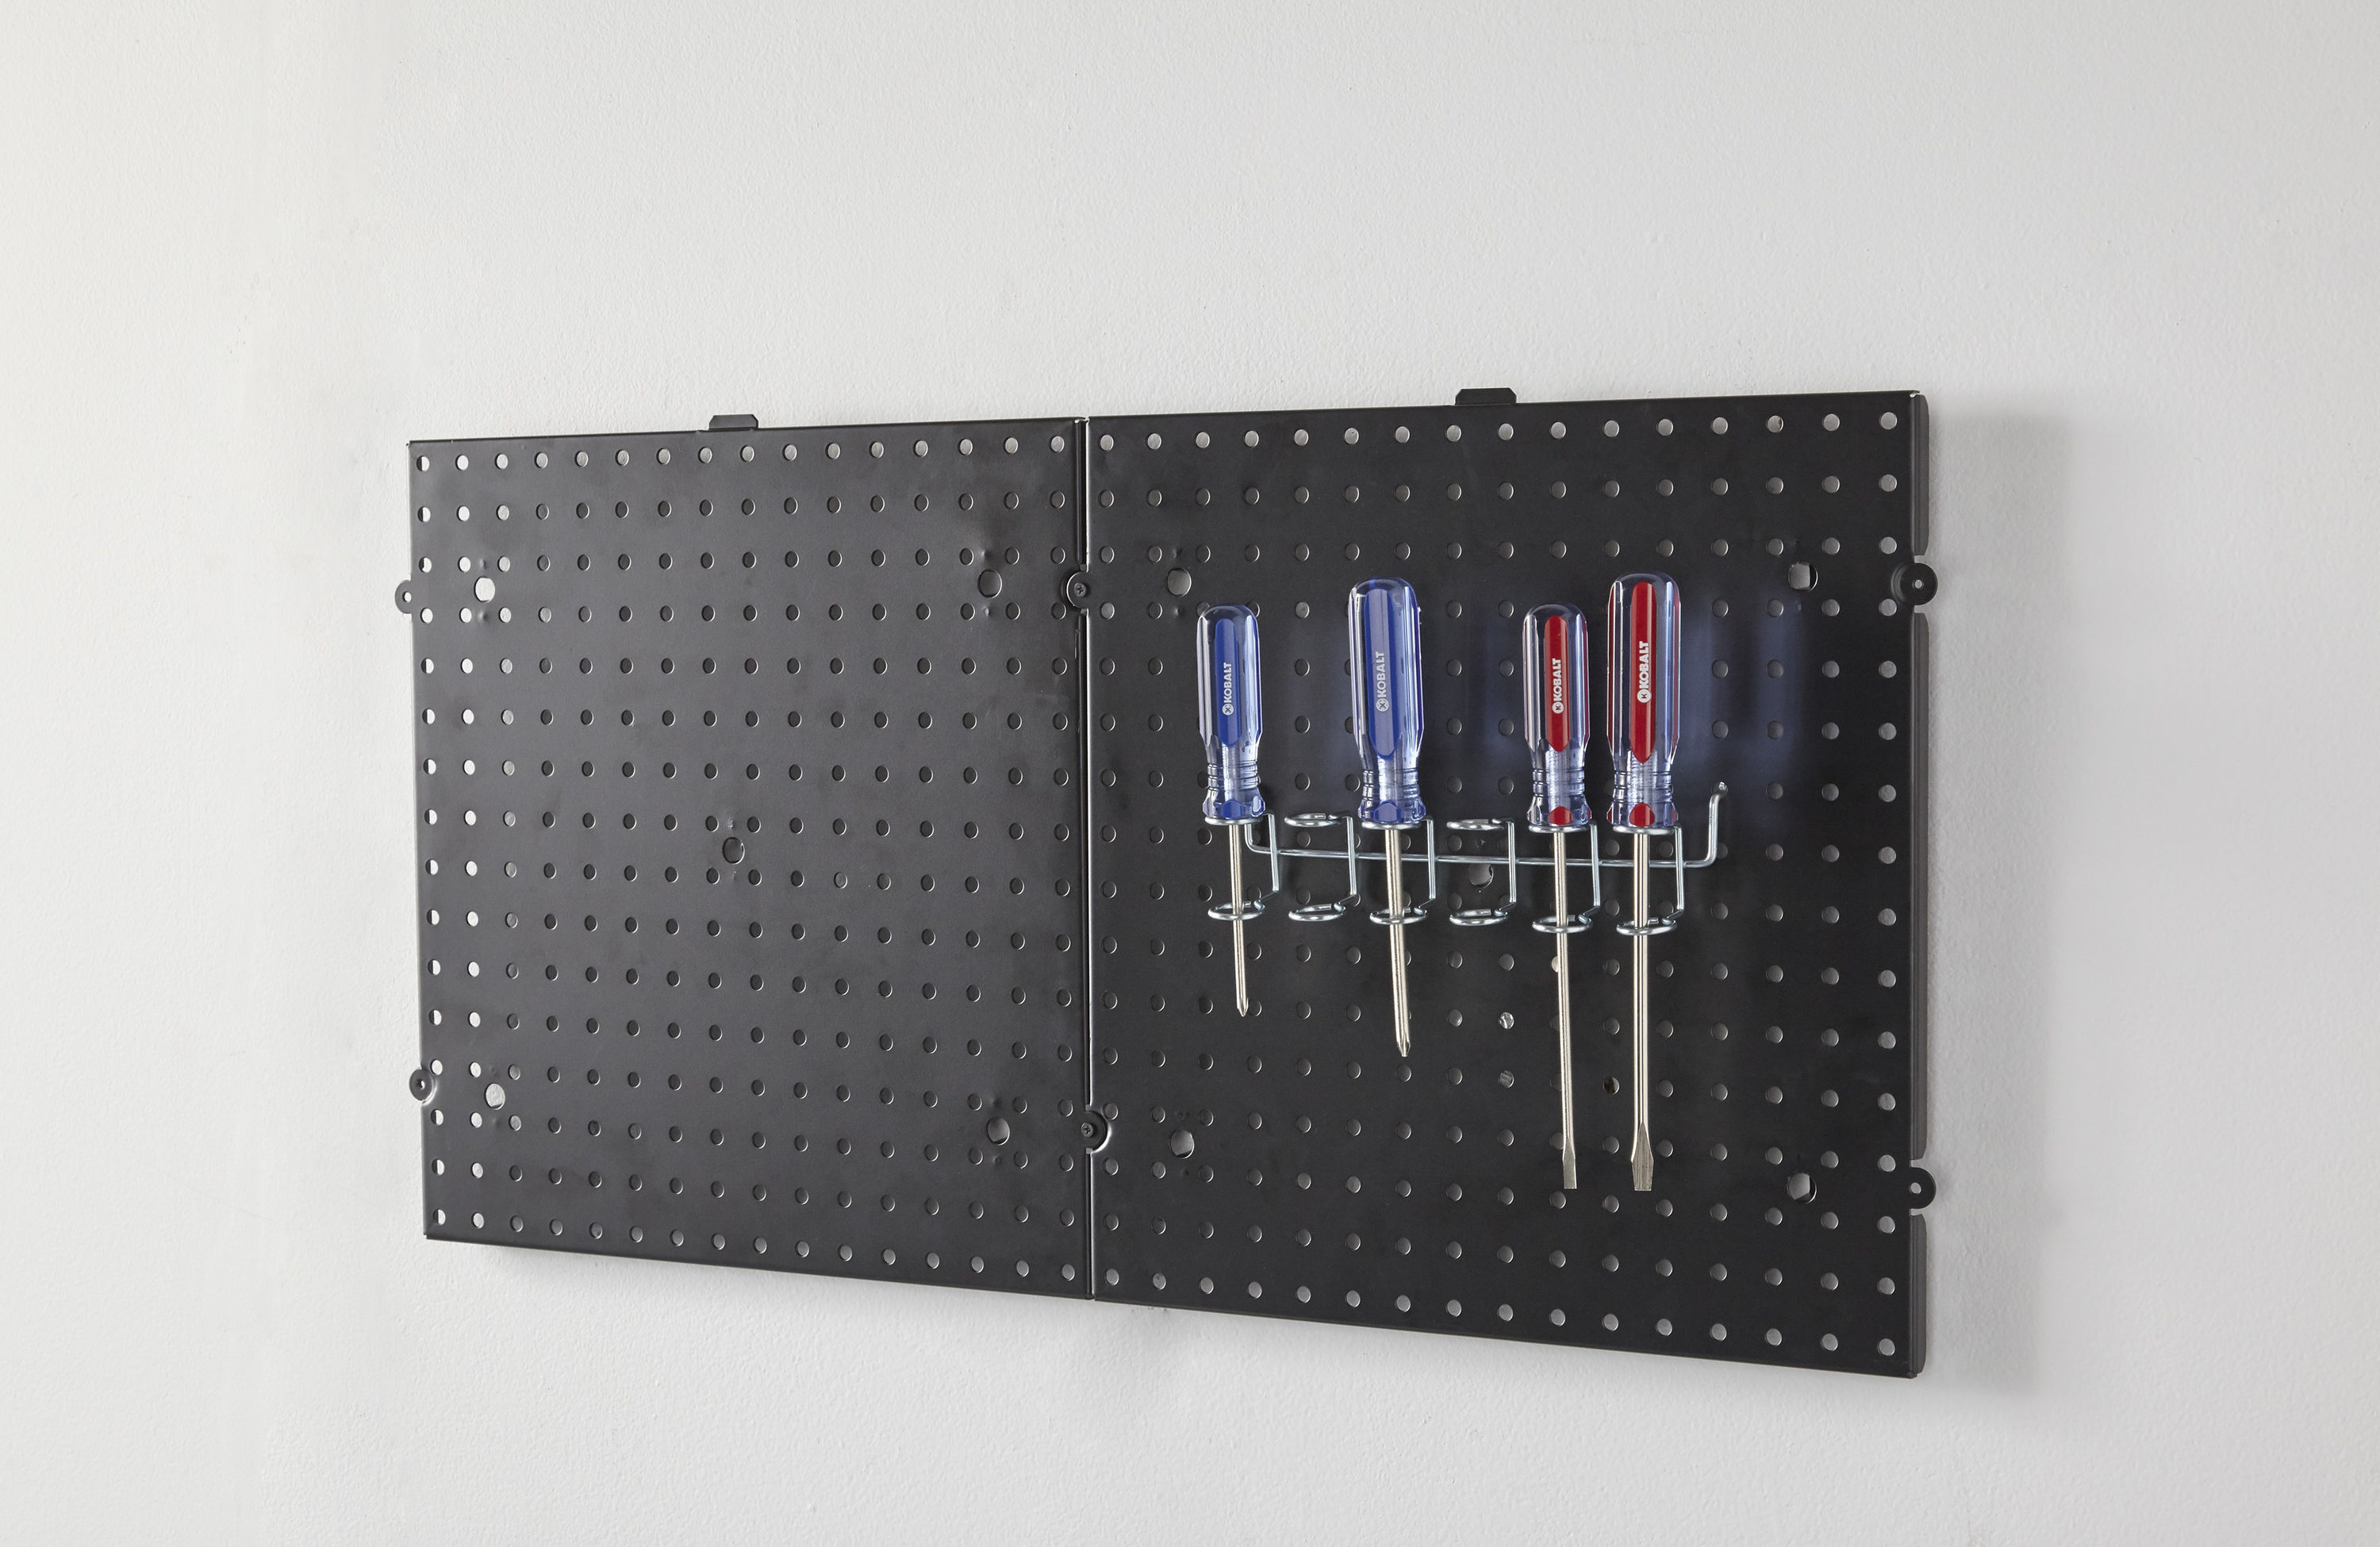 Steel Pegboard Pegboard & Accessories at Lowes.com